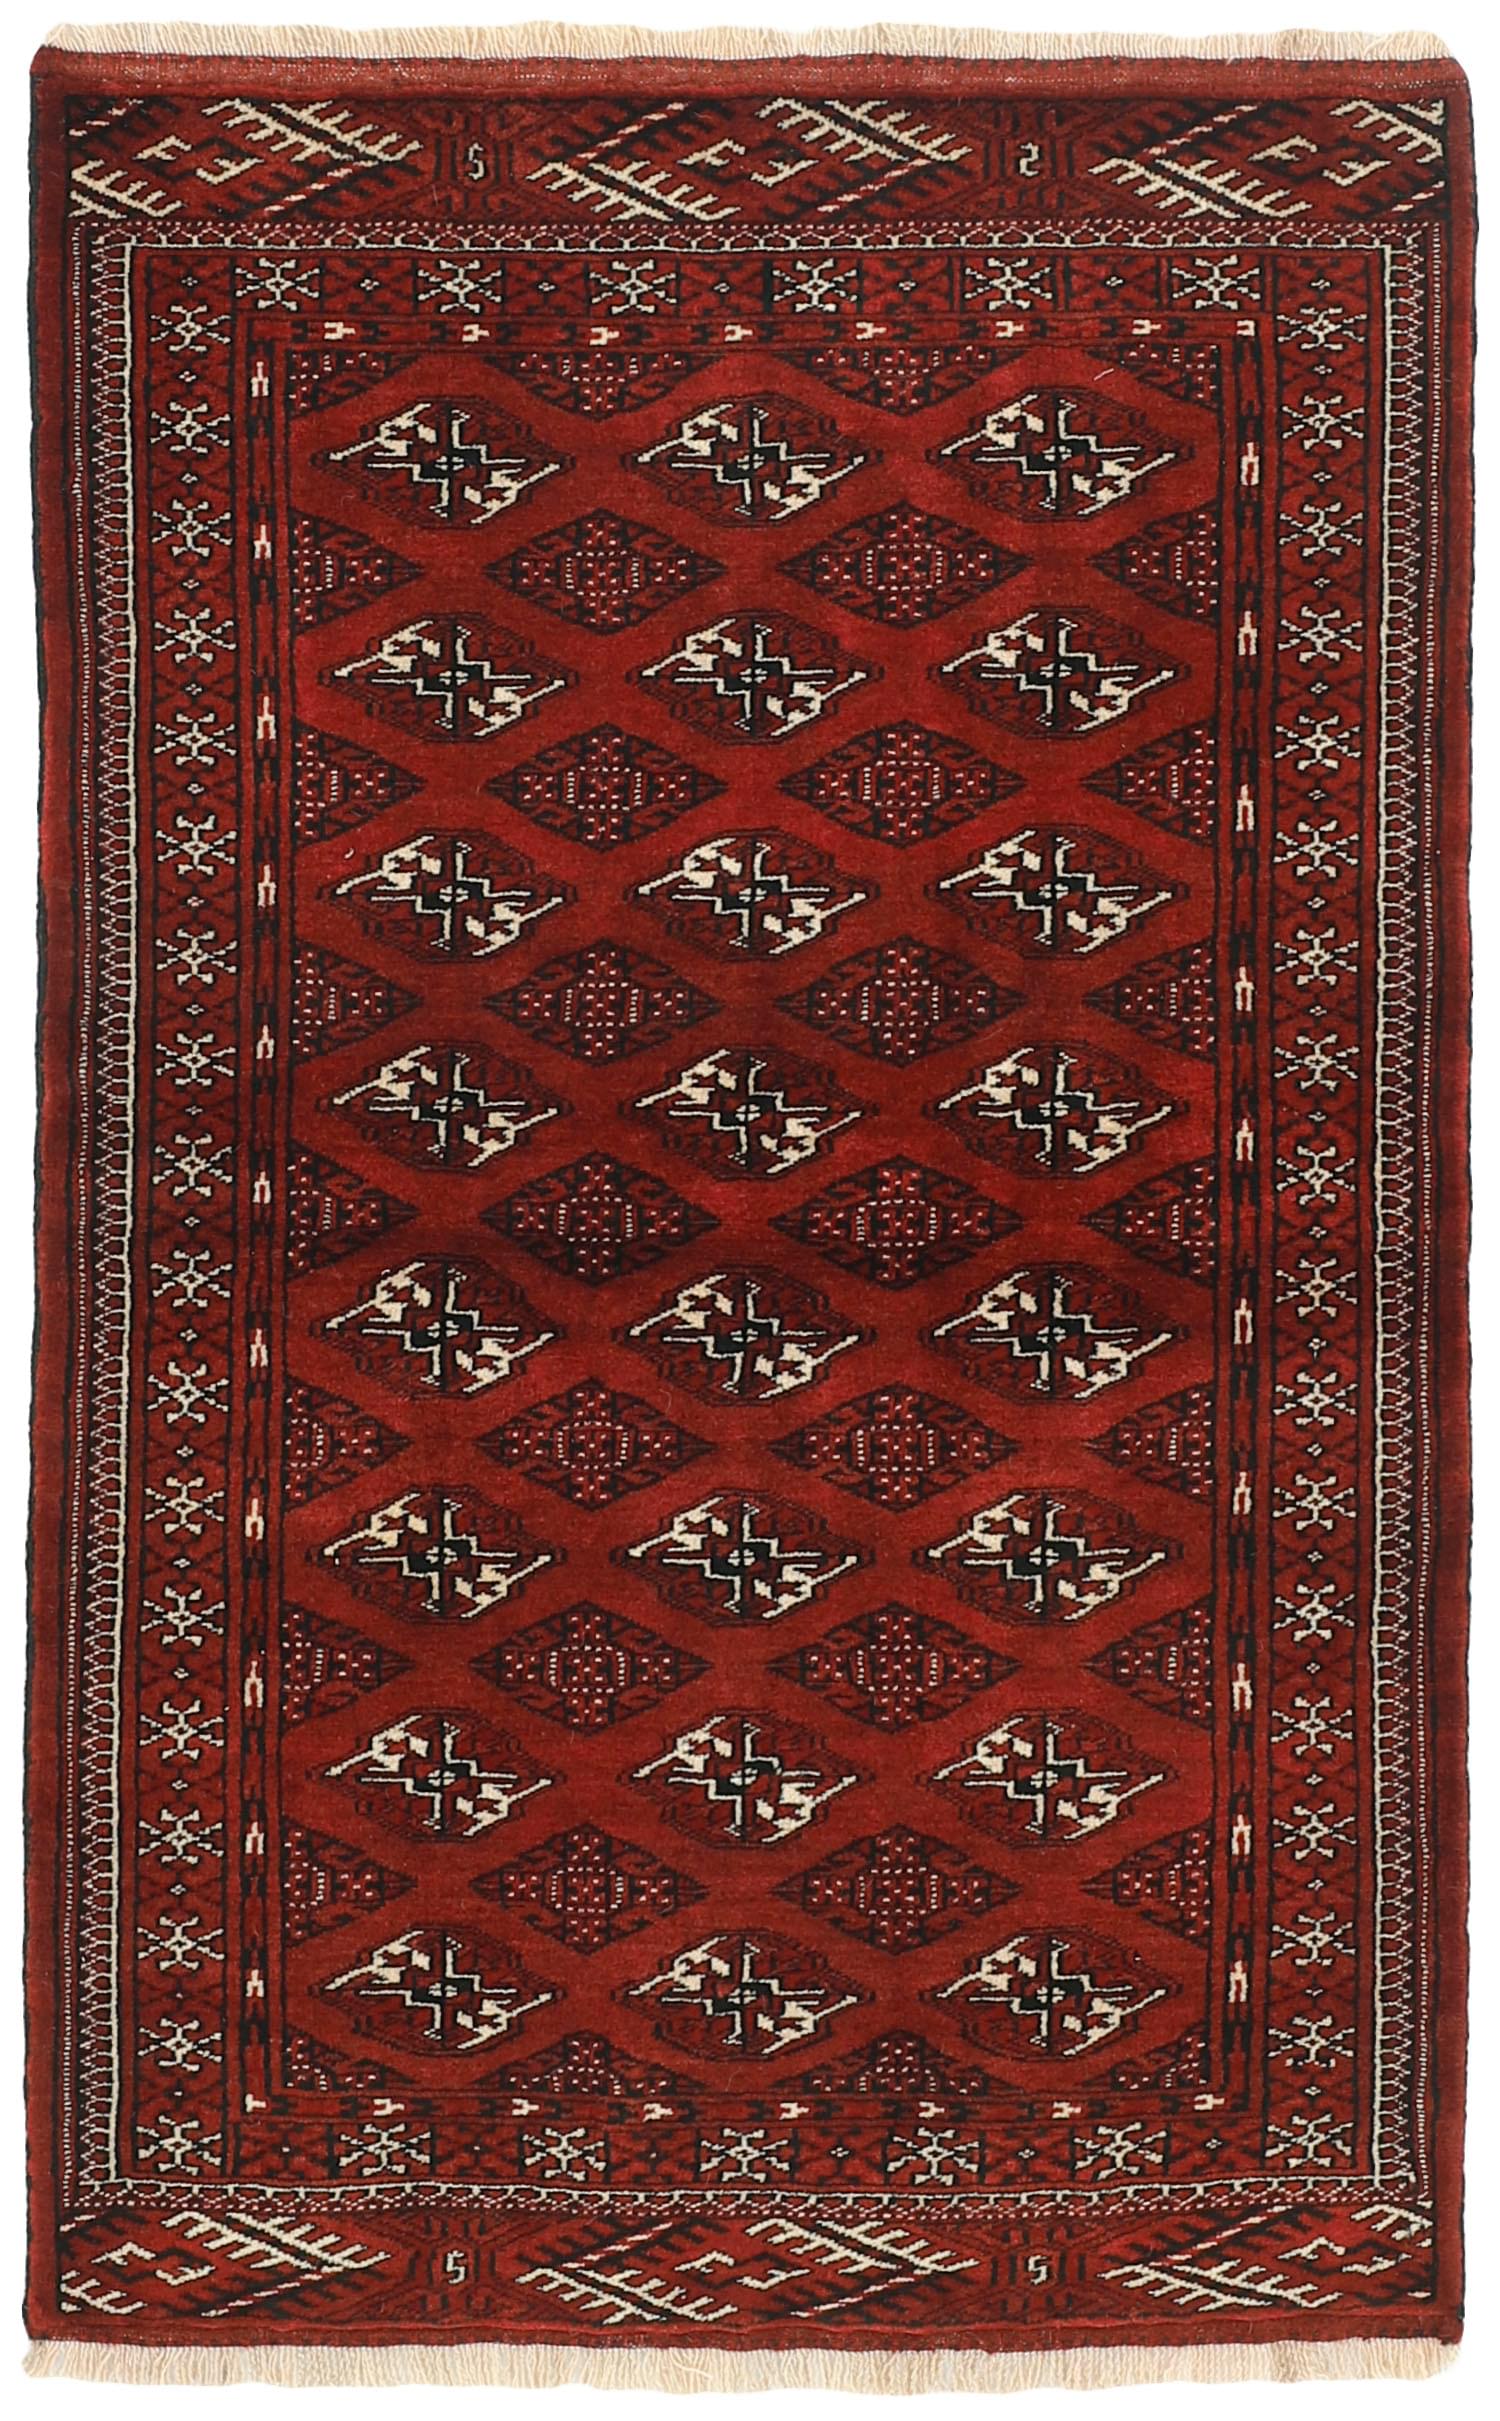 authentic red and blue persian rug